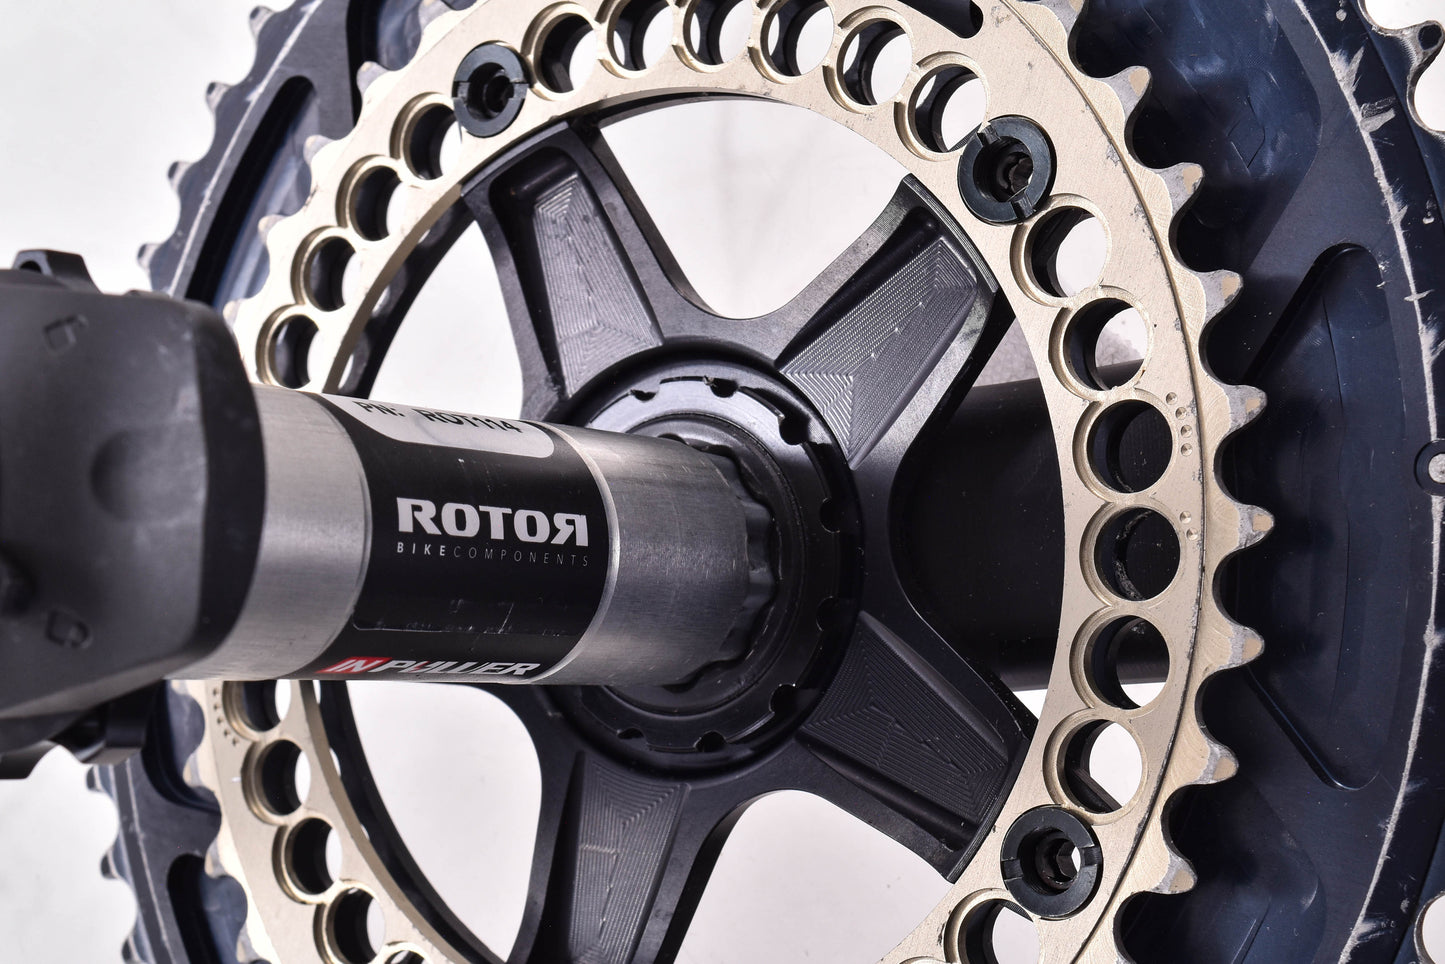 USED Rotor Flow INPower Aero Crankset 175mm 54/40T 130mm BCD Oval Q-Rings 30mm Spindle Power Meter